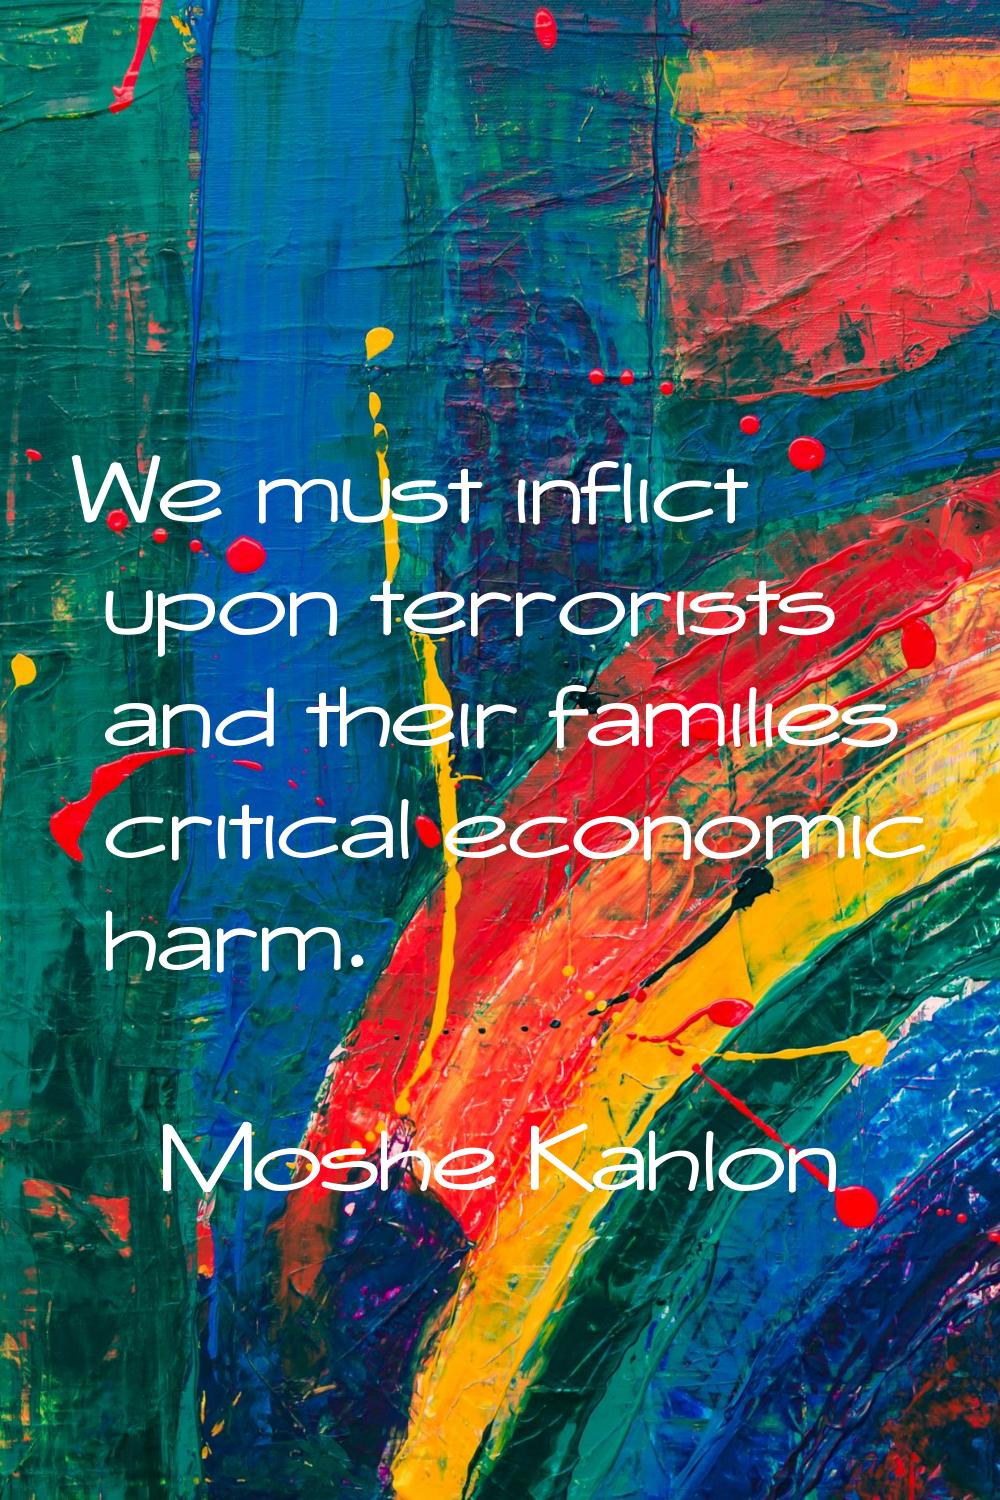 We must inflict upon terrorists and their families critical economic harm.